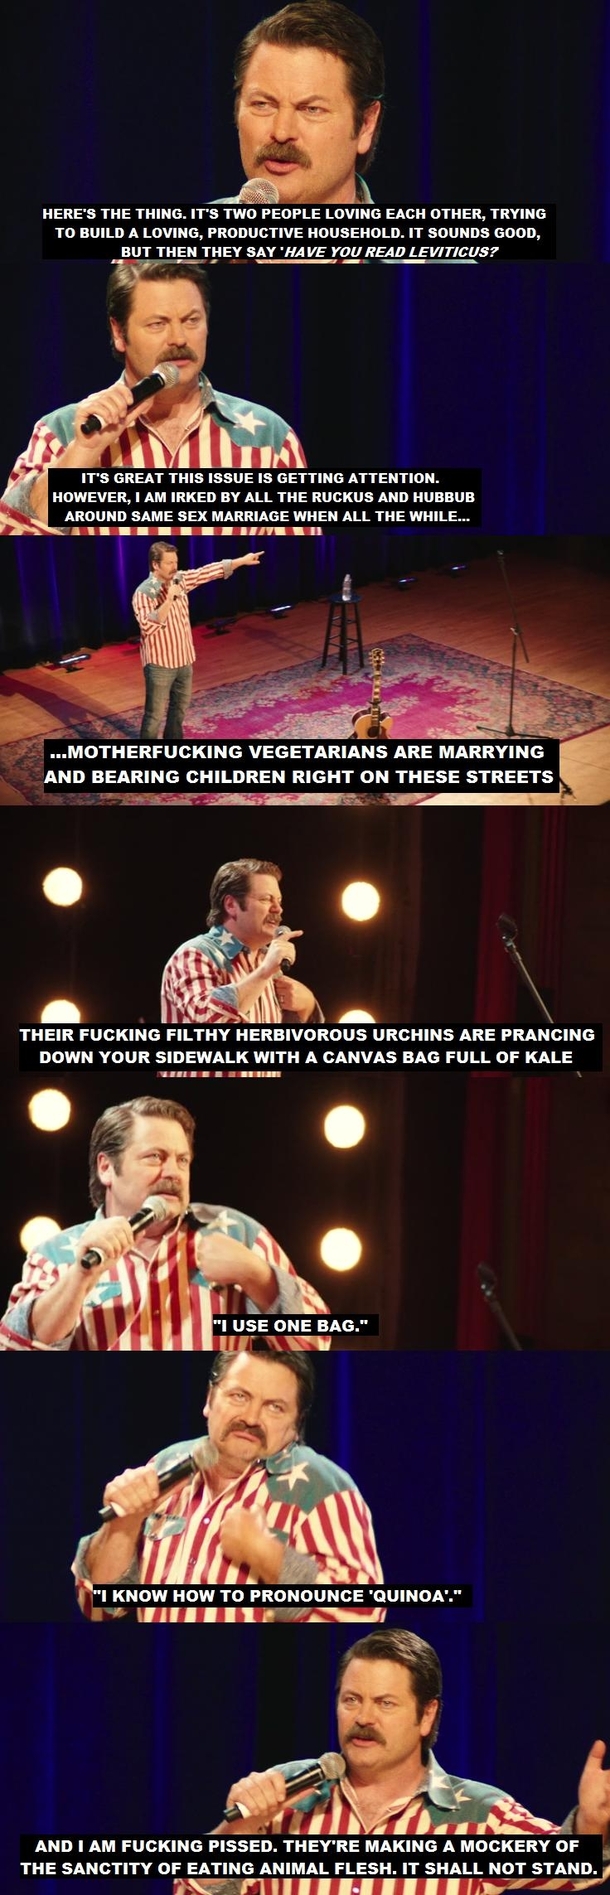 Nick Offerman makes a case for Same Sex Marriage